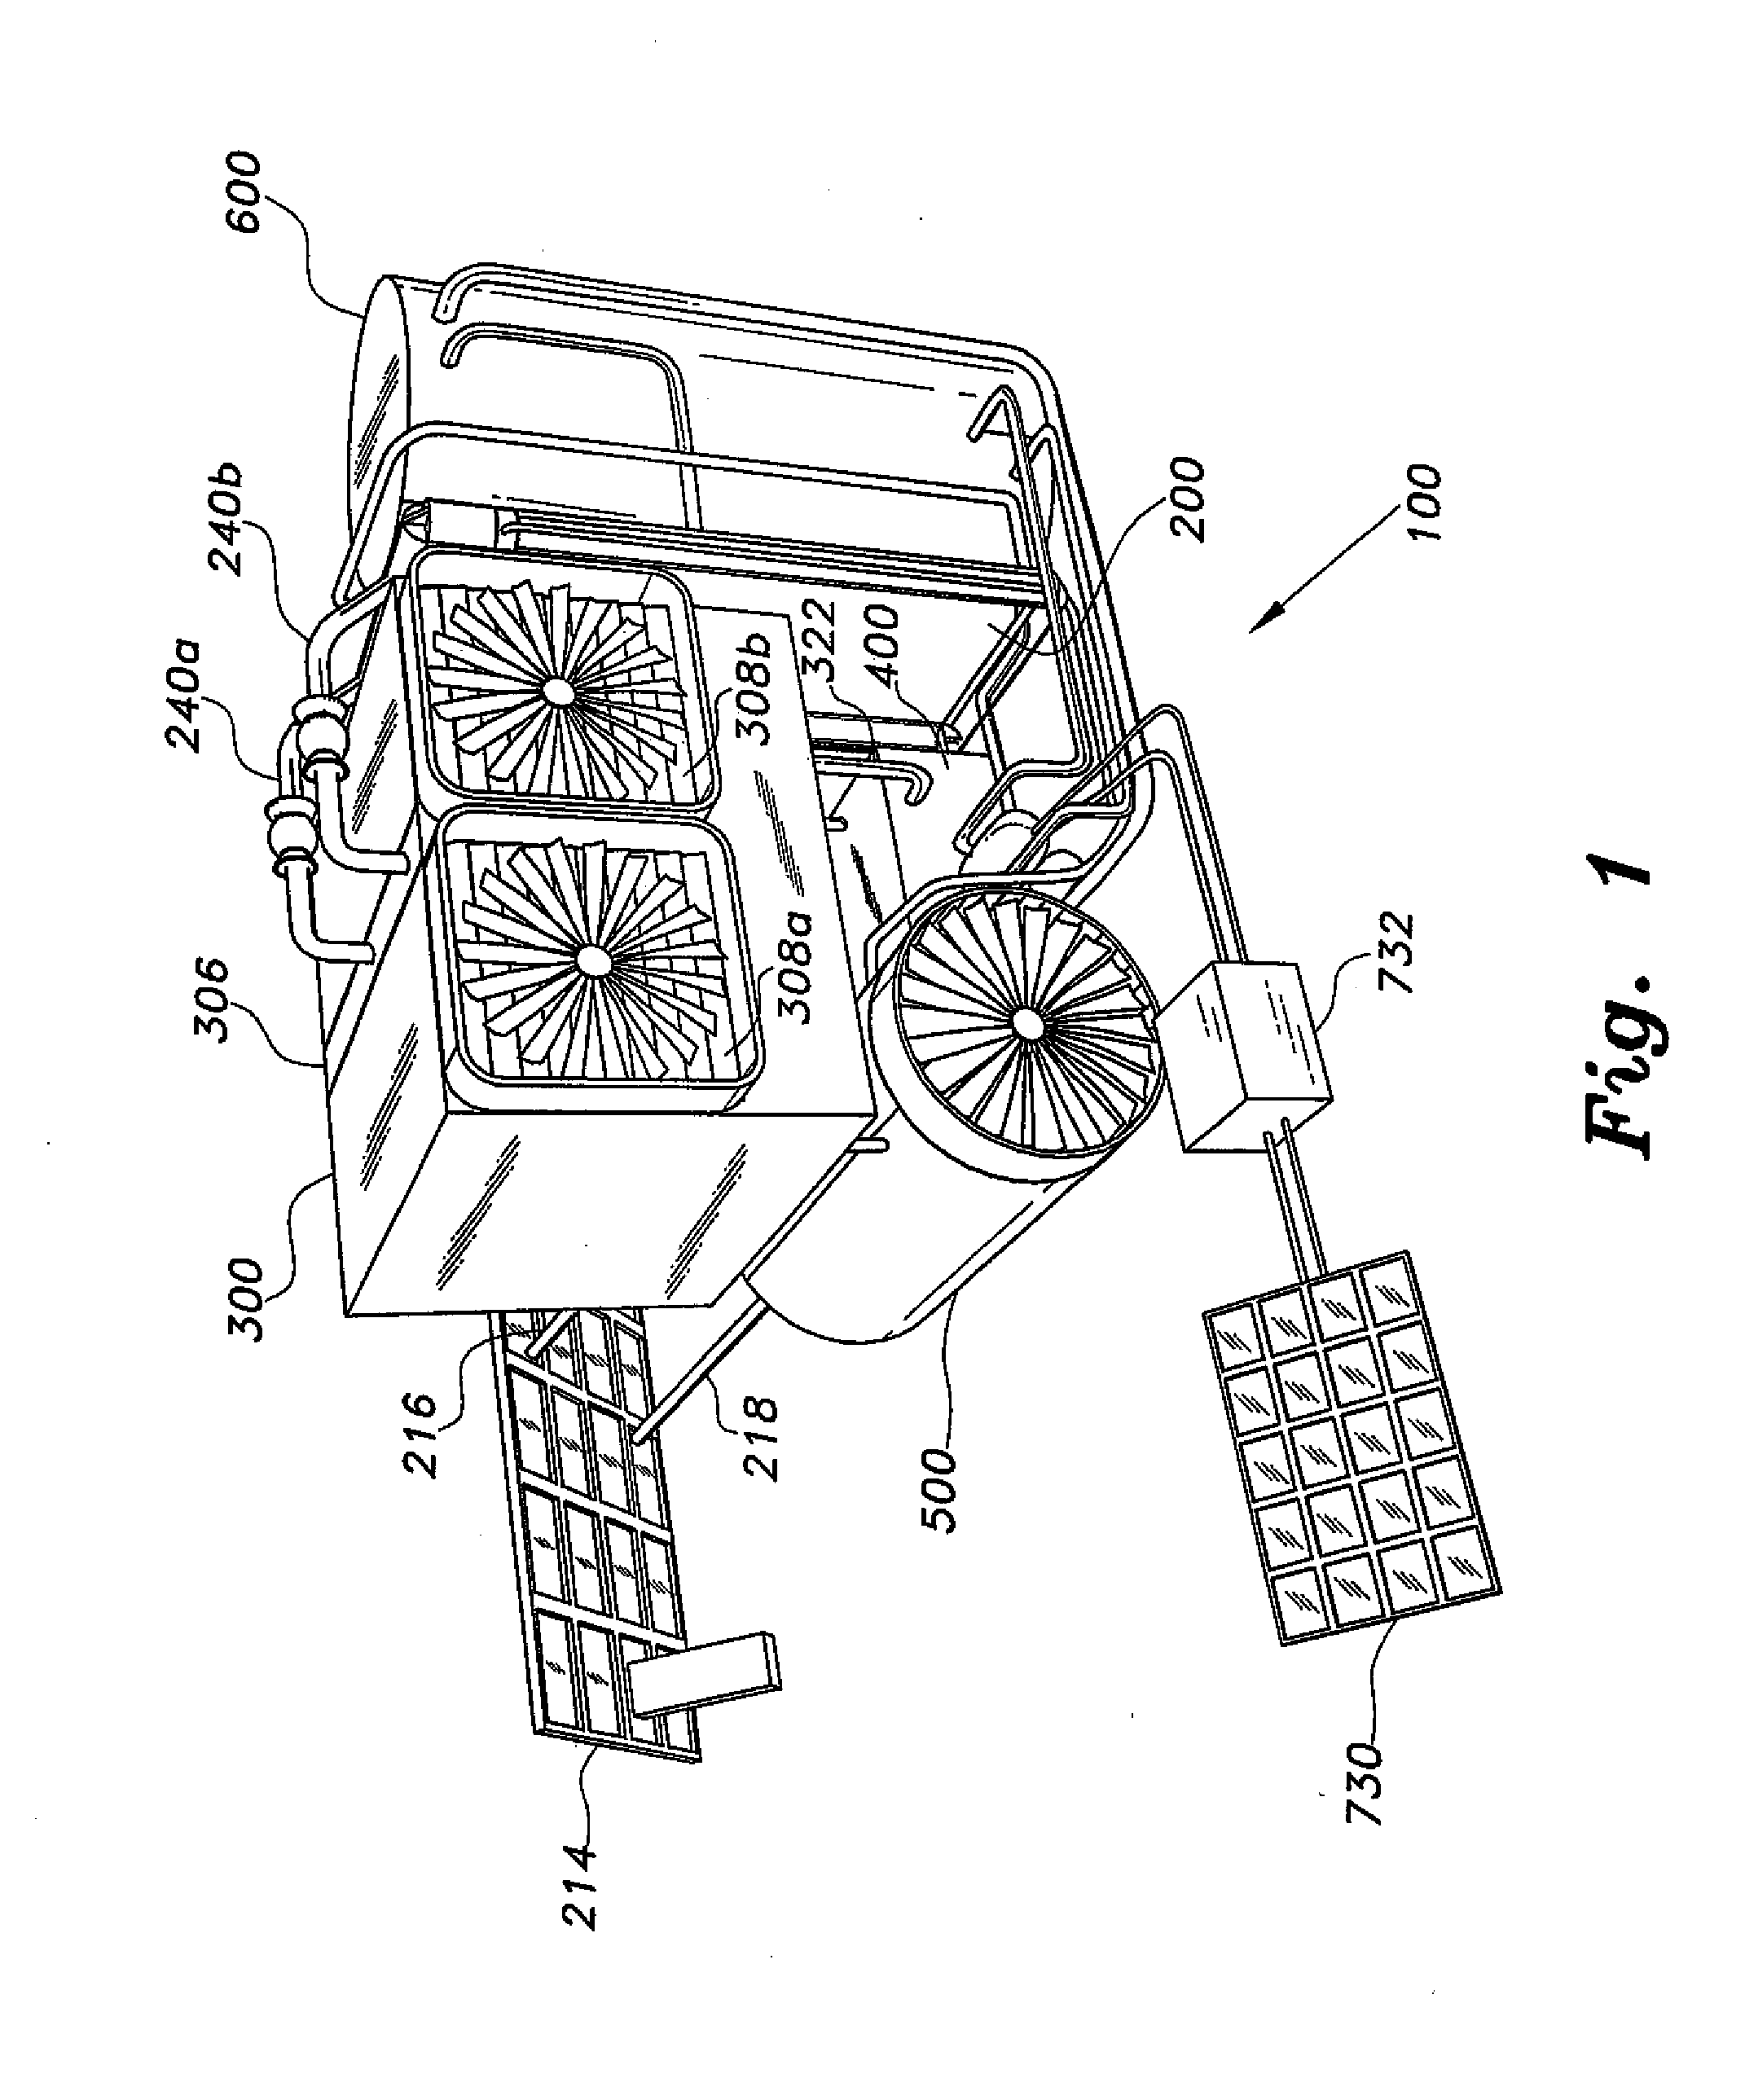 Absorption cooling system